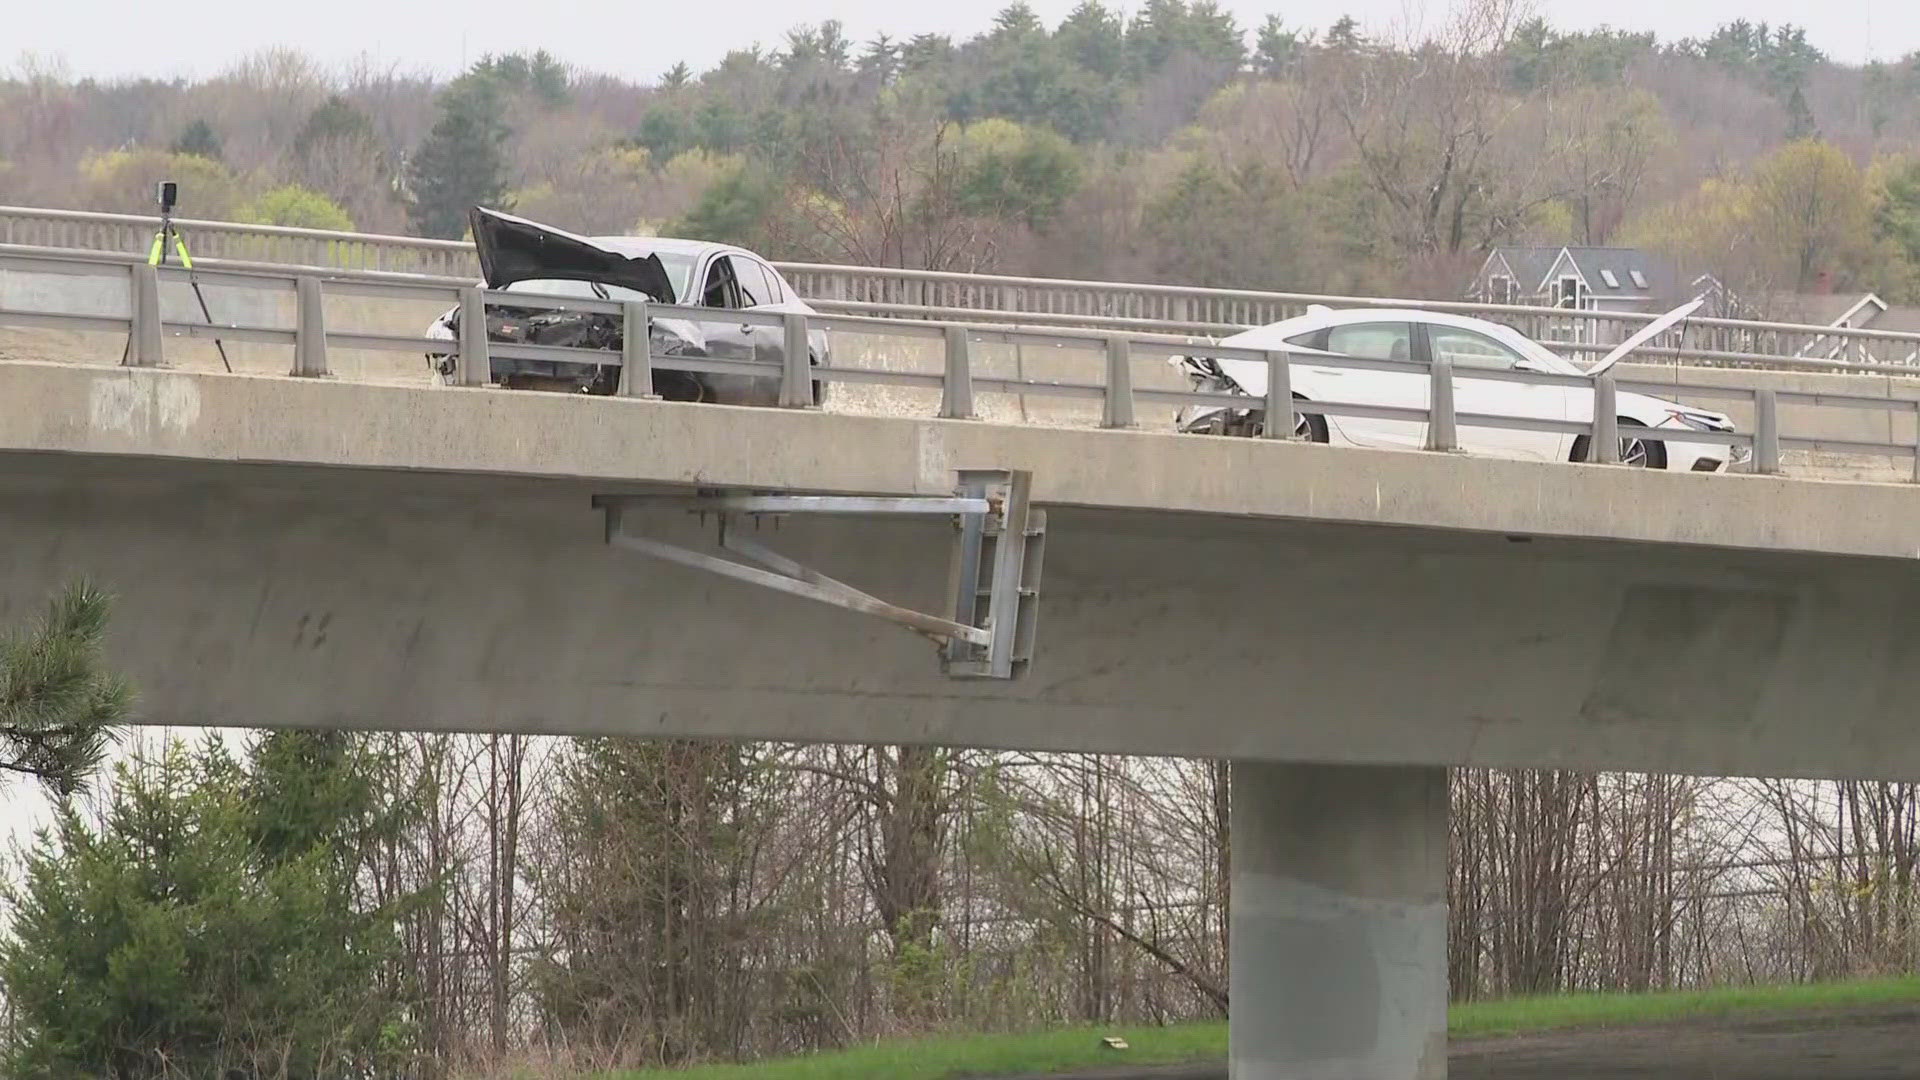 Police confirmed that the southbound exit was closed Monday morning due to the crash. The exit reopened around 1 p.m.